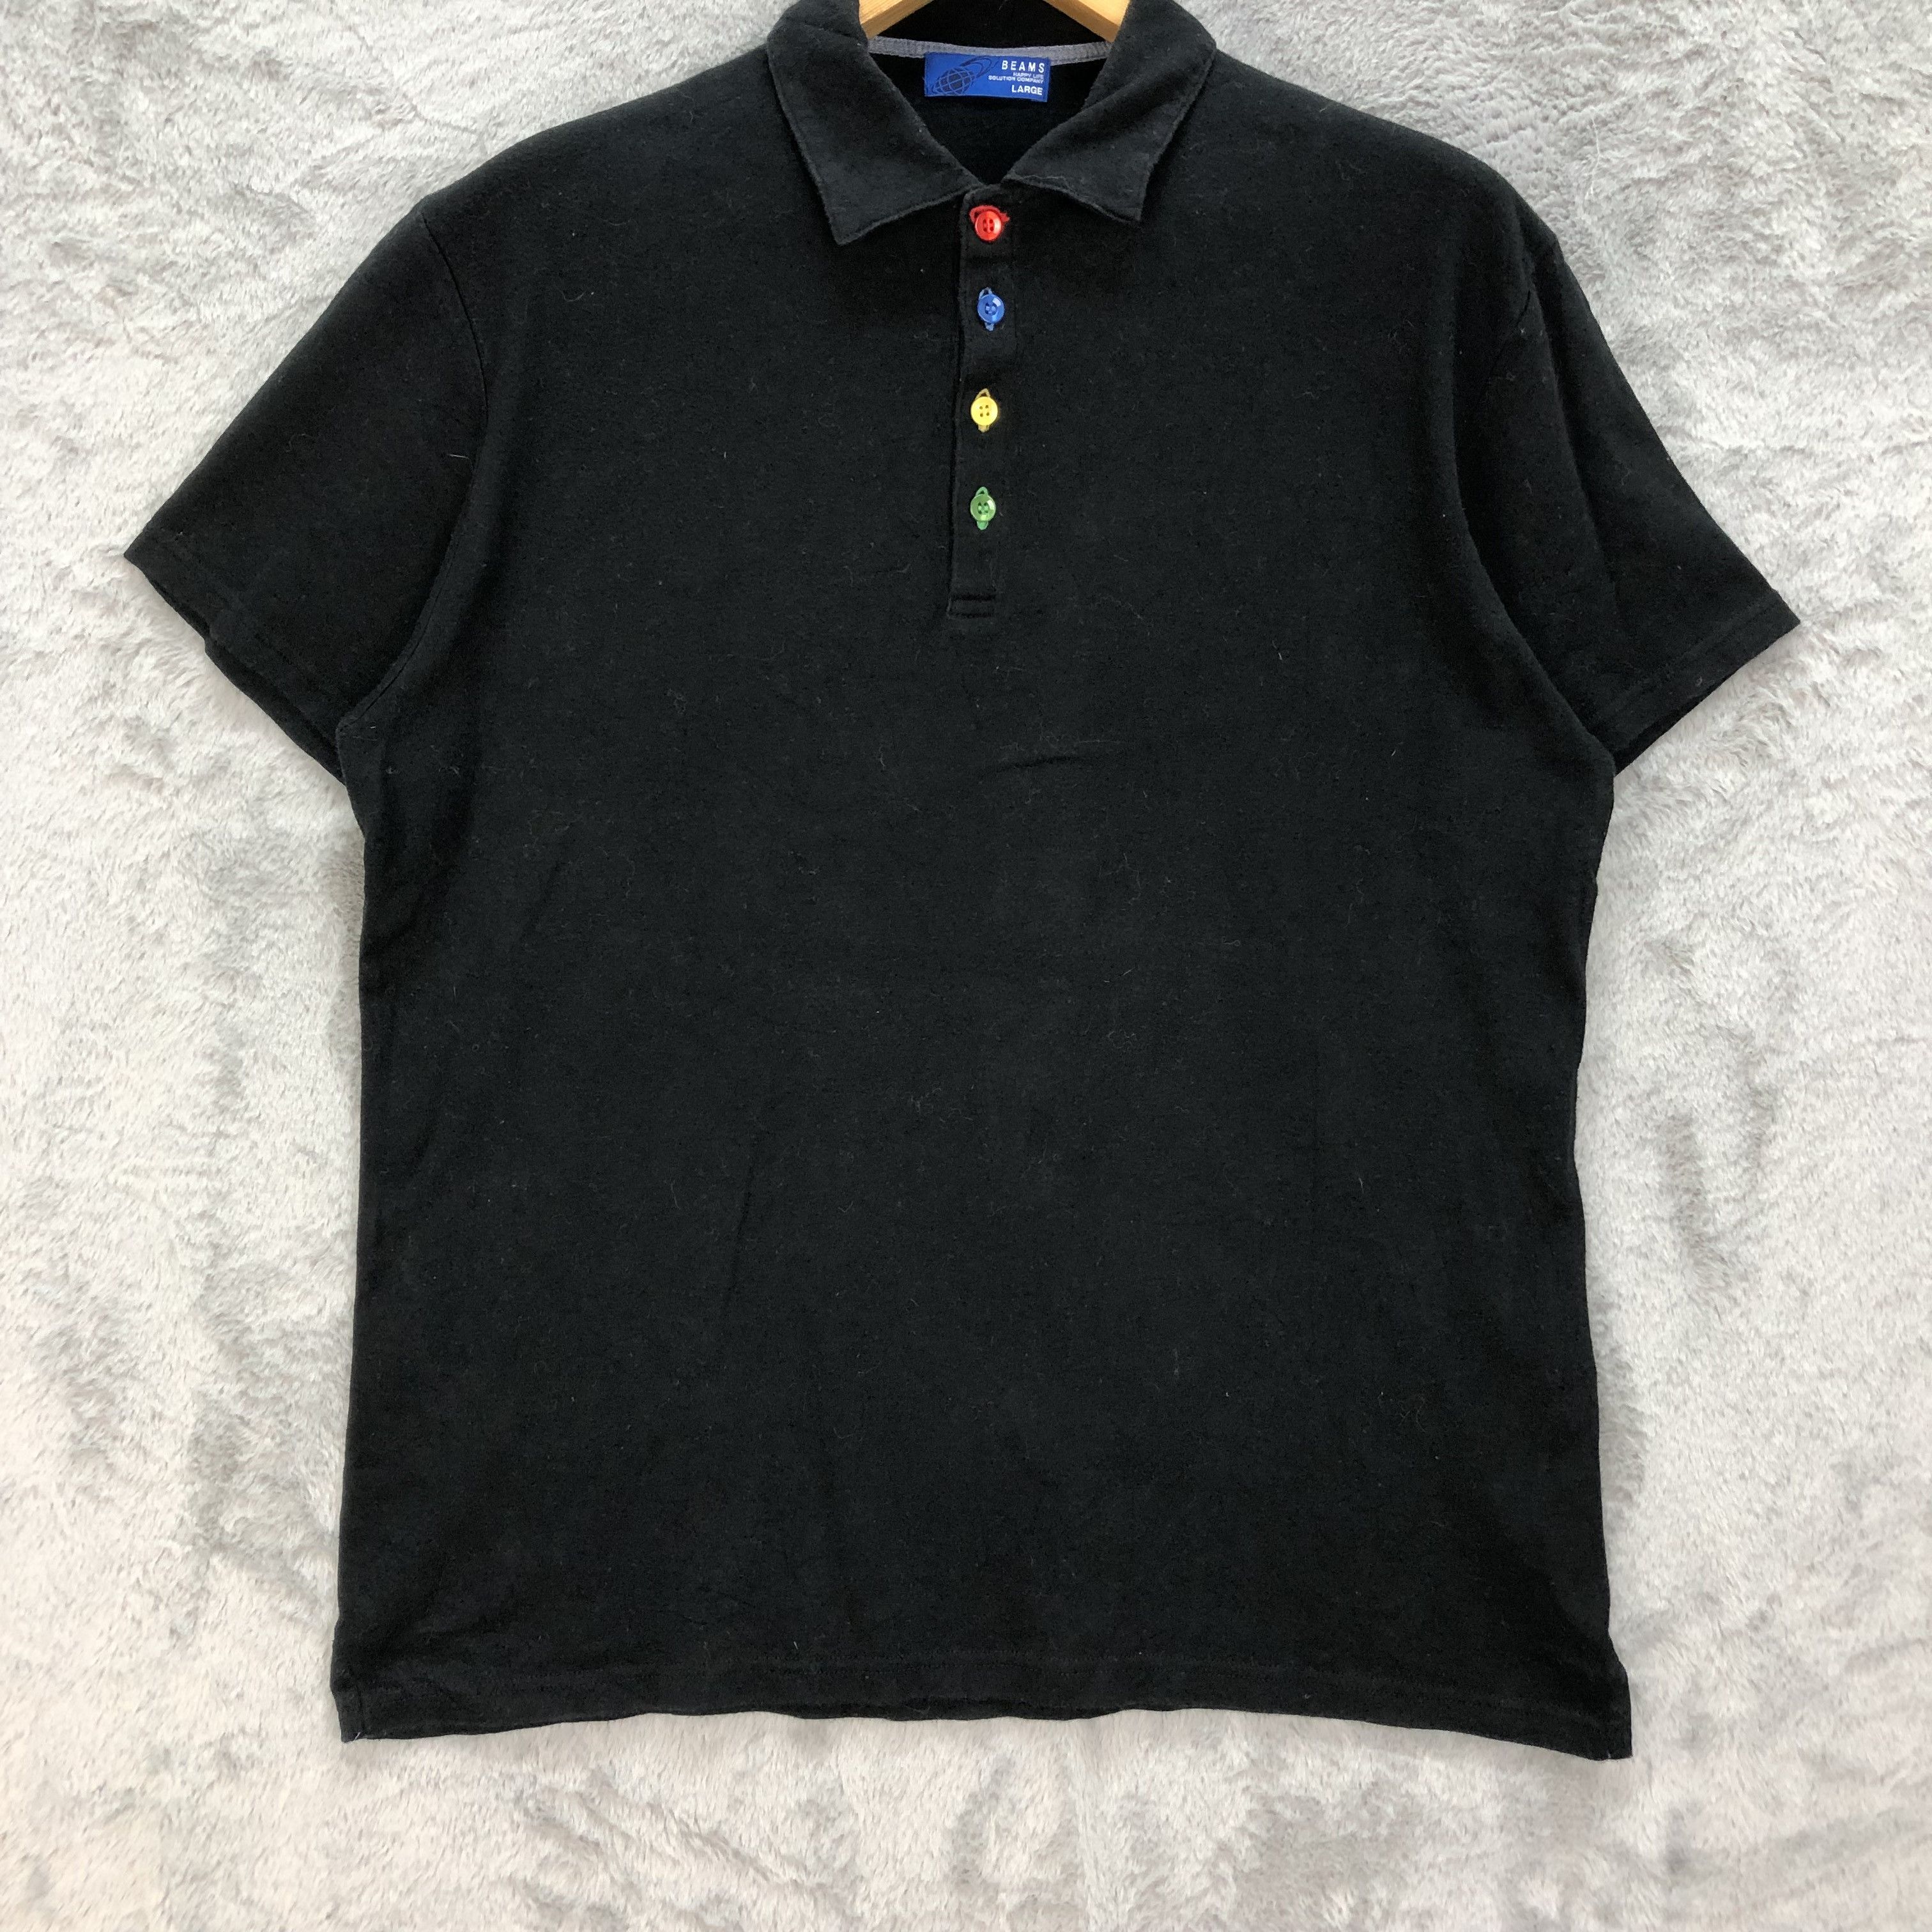 BEAMS Made in Japan Colorful Button Polo Shirt #4762-167 - 3